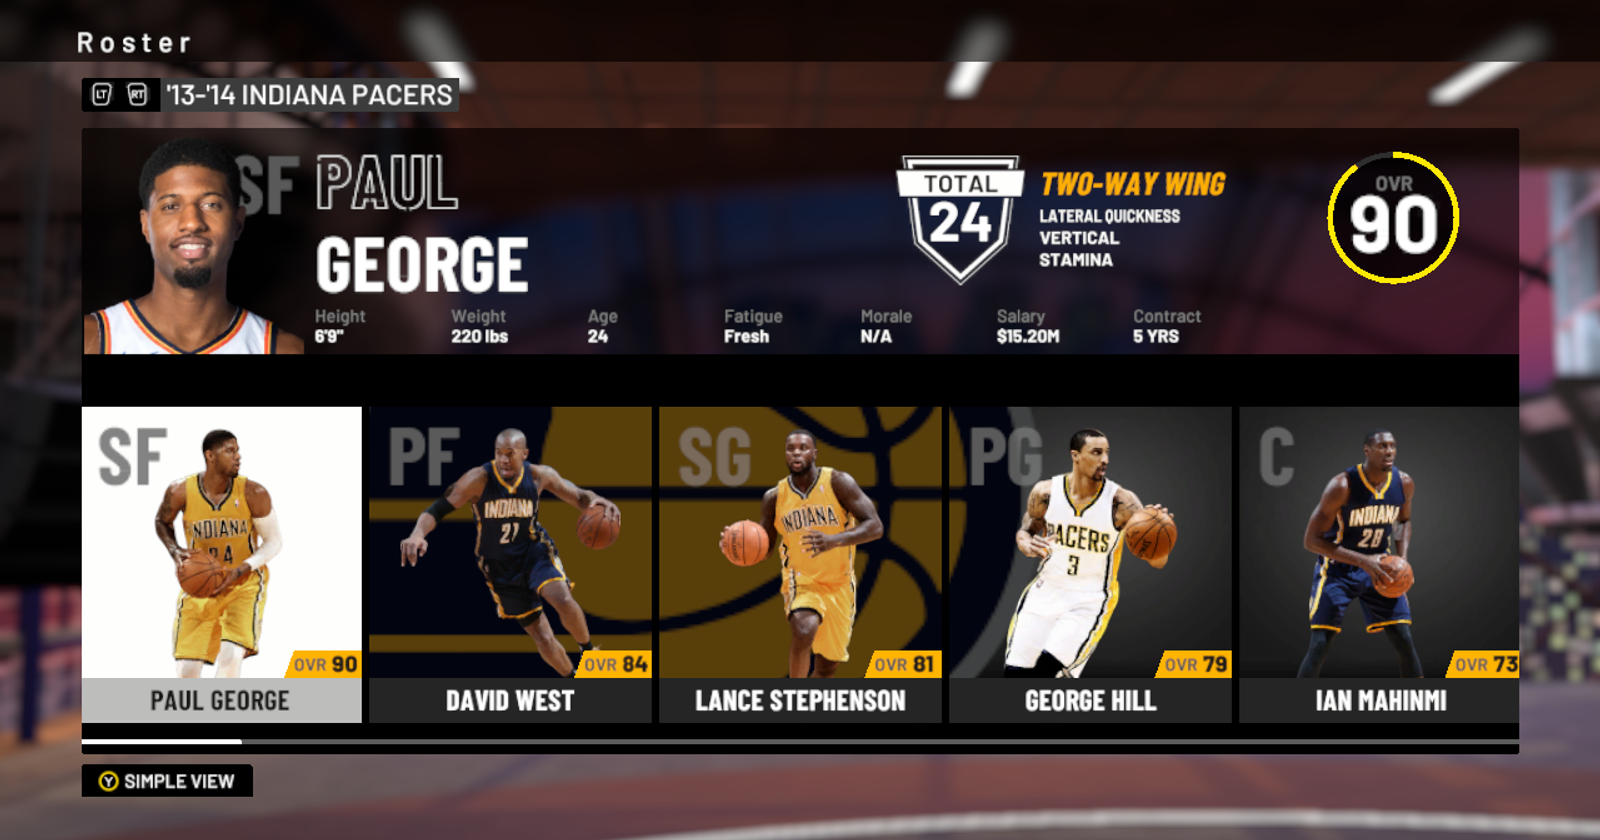 NBA 2K19: 2013-2014 Indiana Pacers Roster Player Ratings and Roster